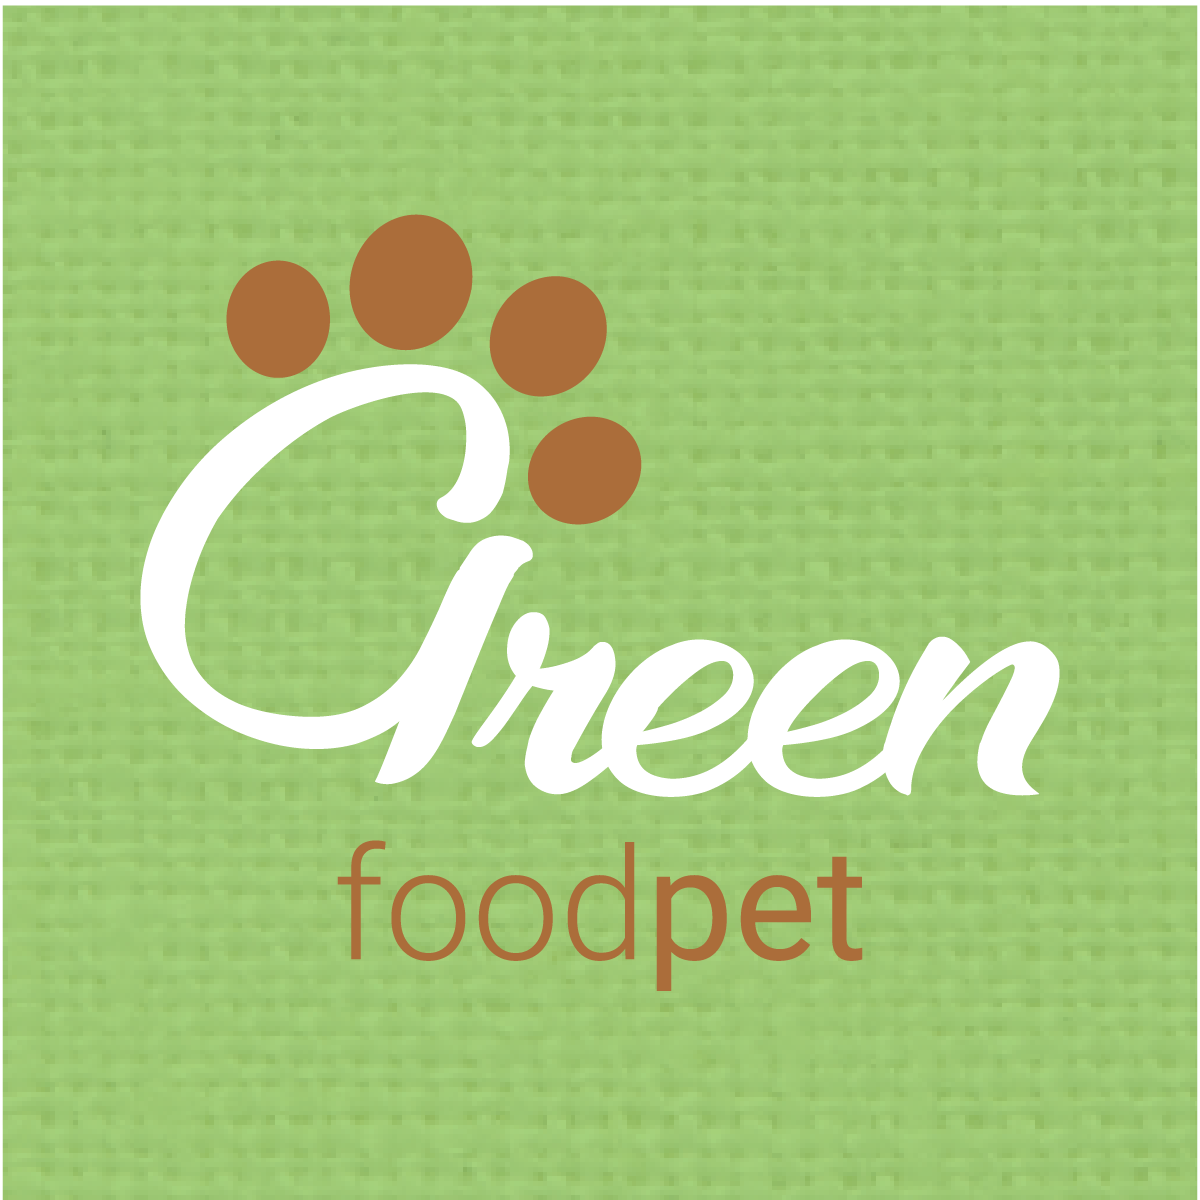 greenfoodpet GIF - Find & Share on GIPHY